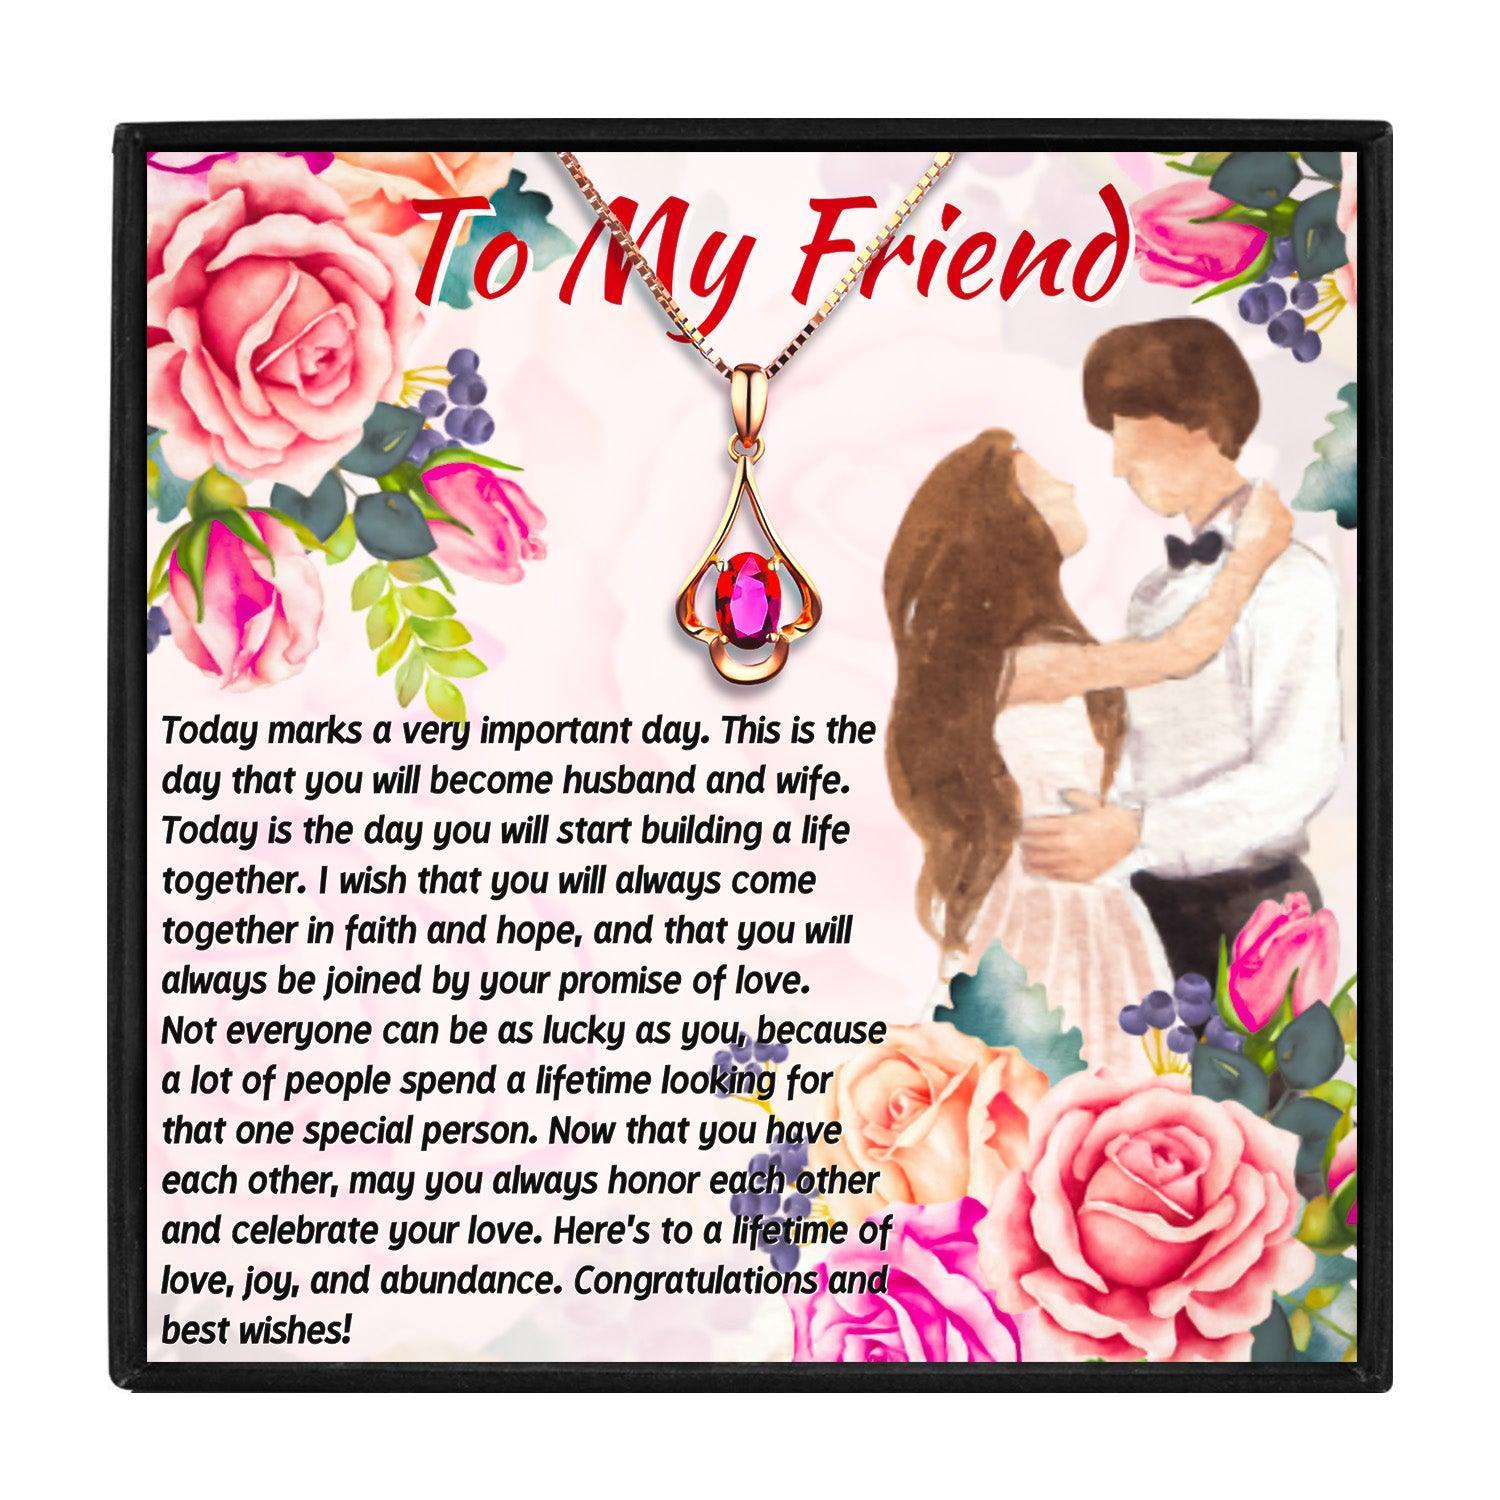 Wedding Card Message | 5 Ideas to Express Your Heartfelt Wishes - Crafty Art